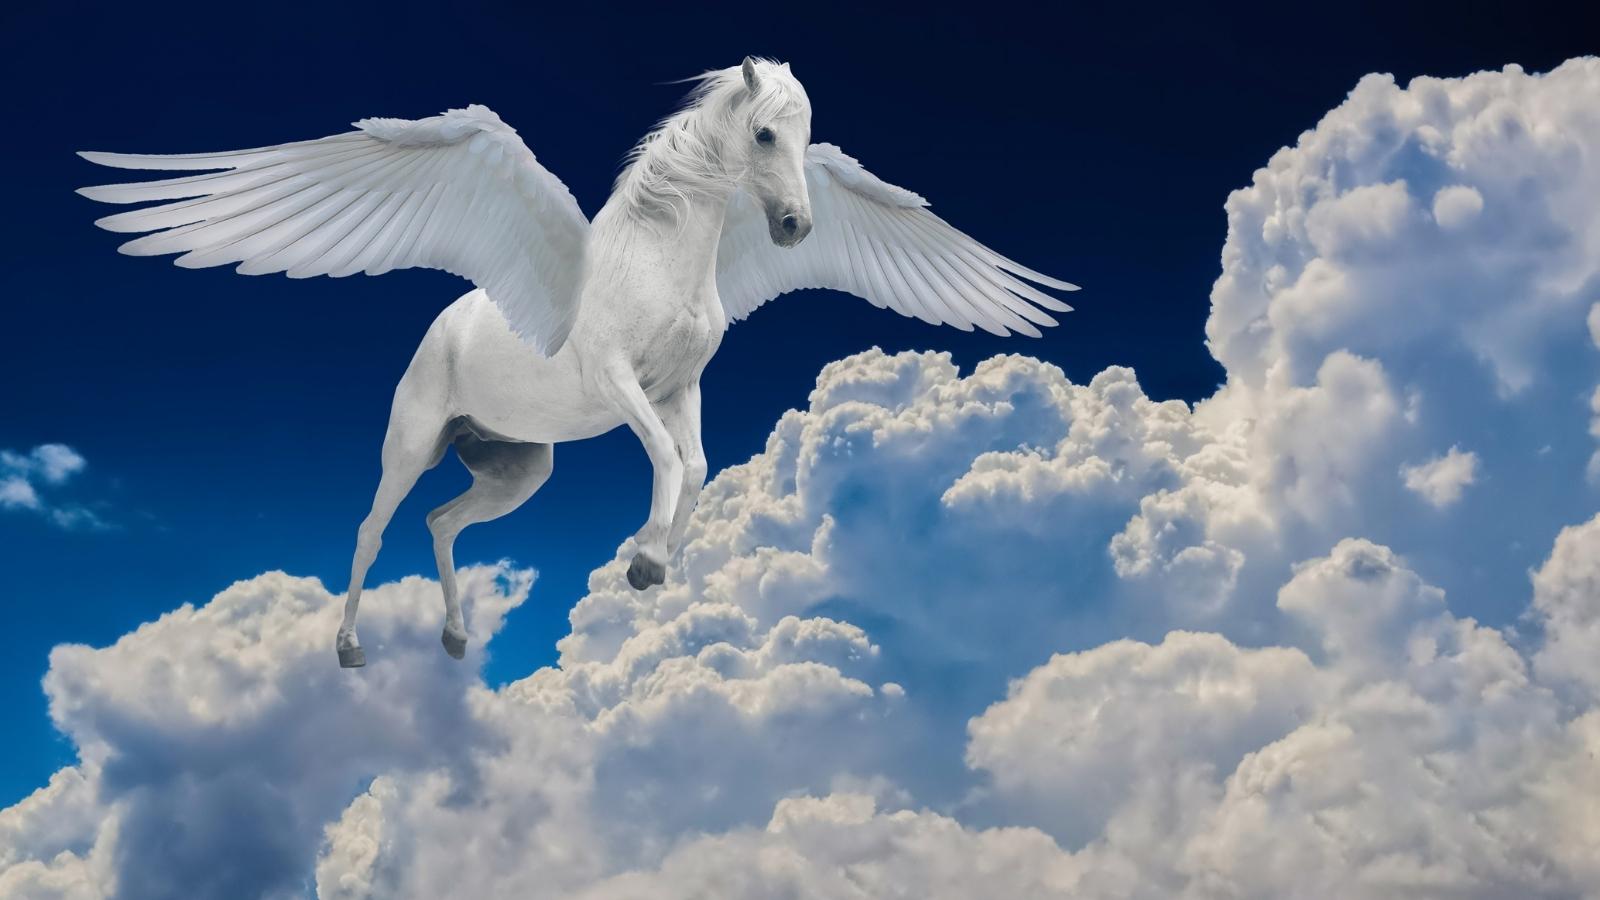 The winged horse - Understanding your dreams - Kaya